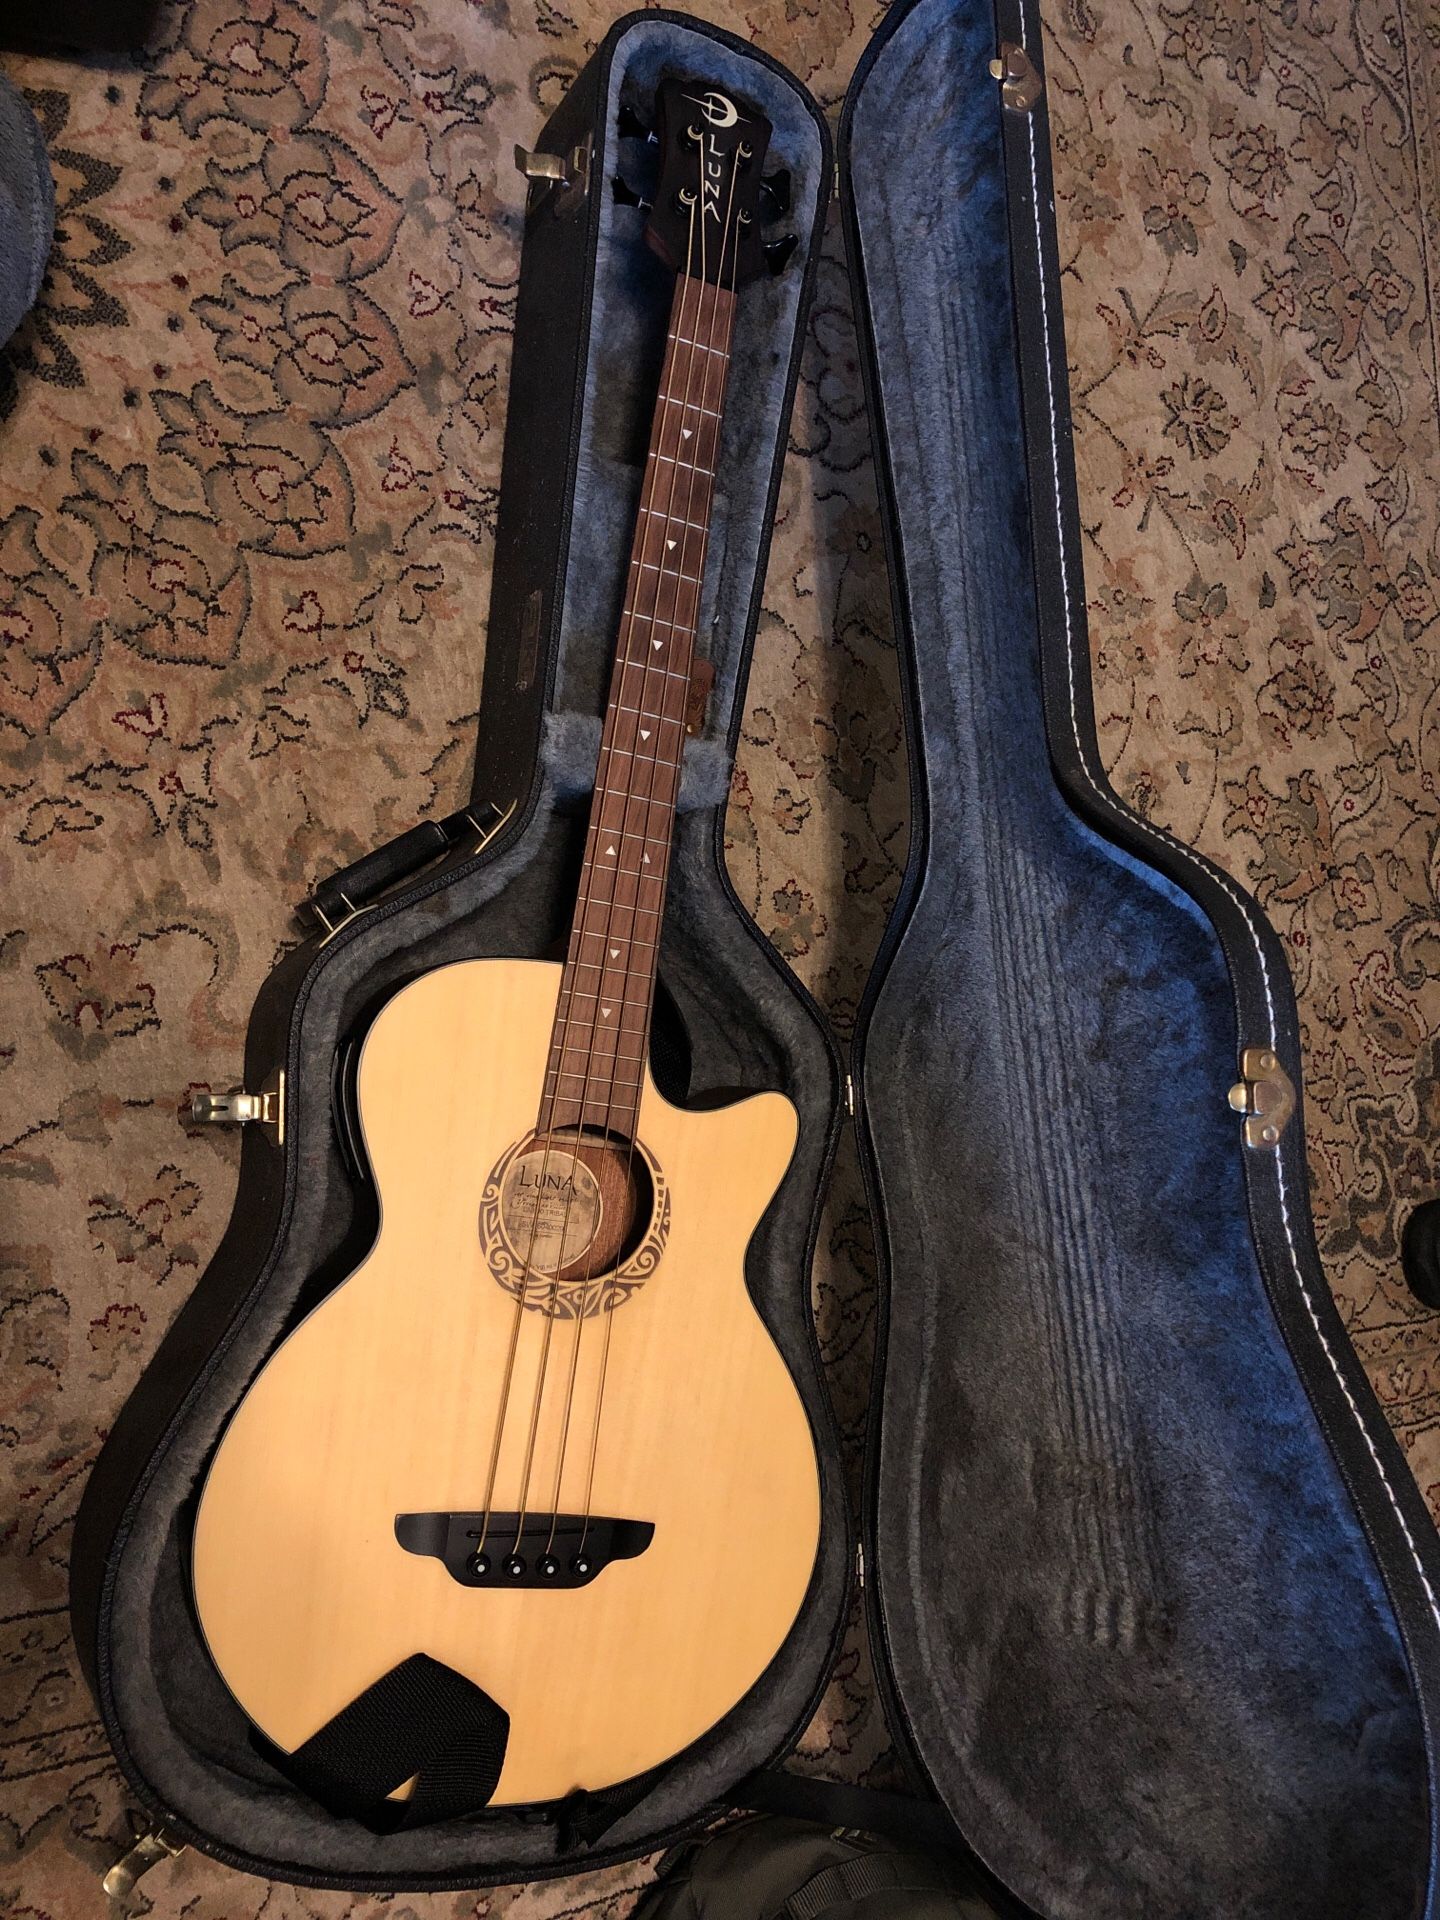 Luna acoustic electric bass guitar. Case and amp included